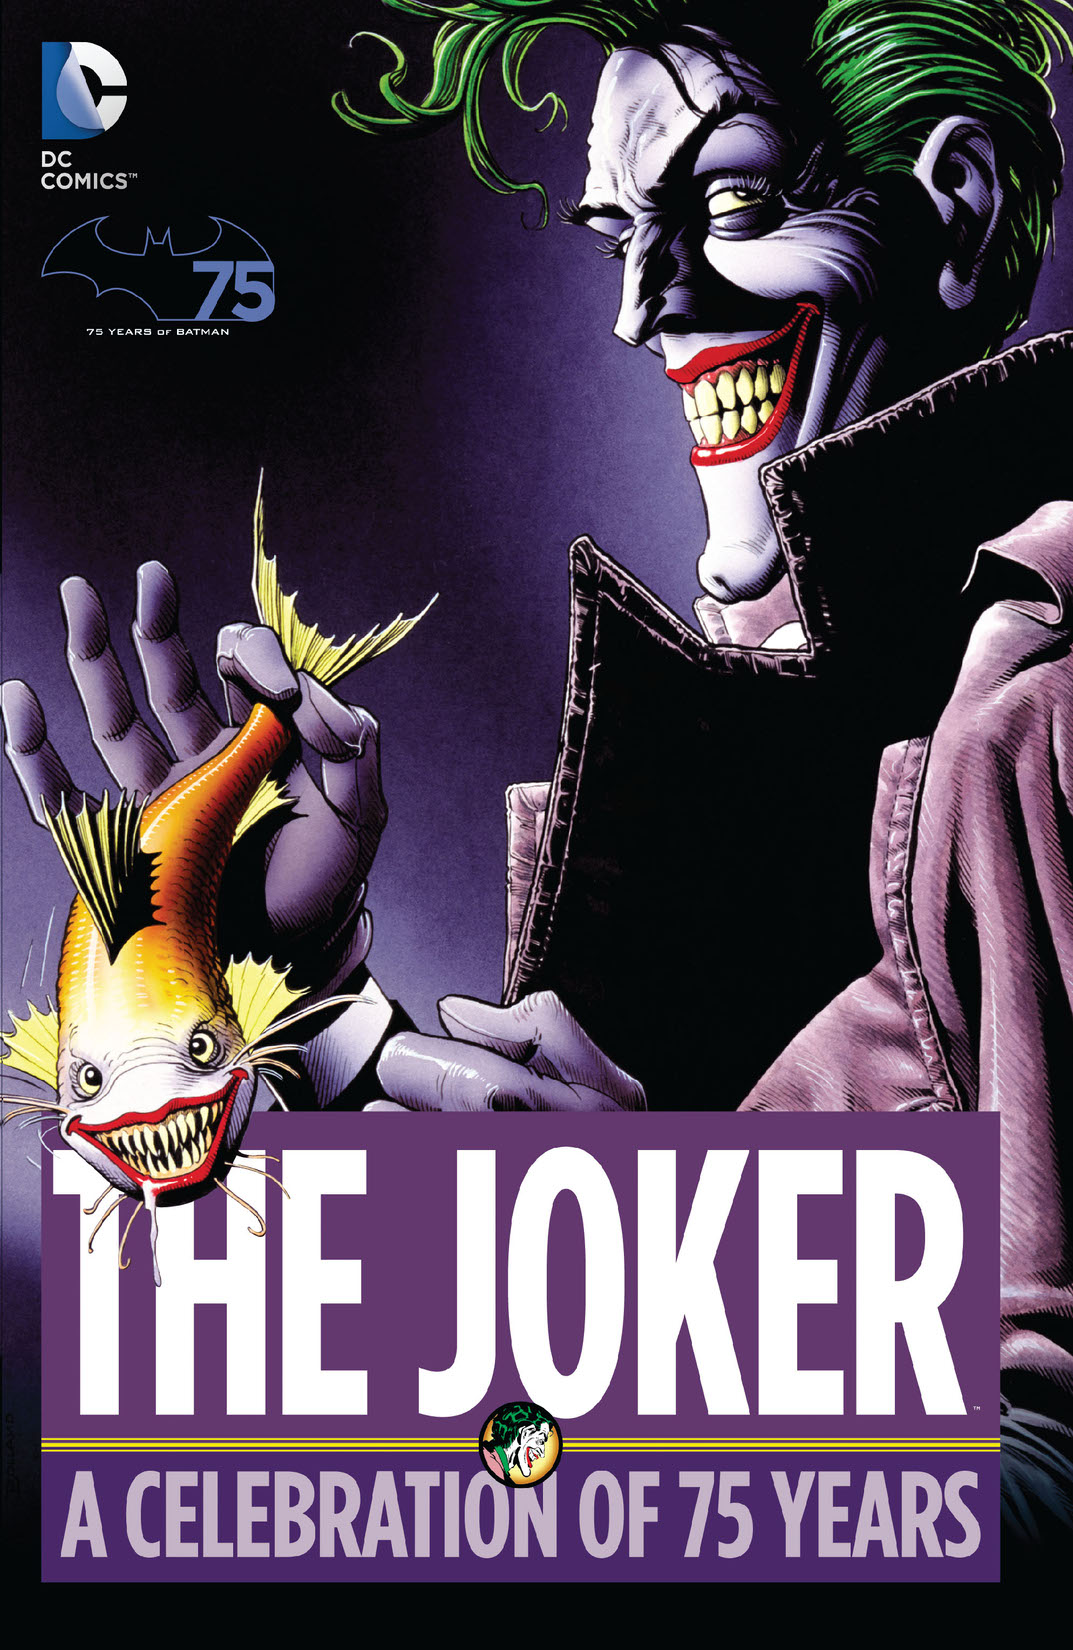 The Joker: A Celebration of 75 Years preview images